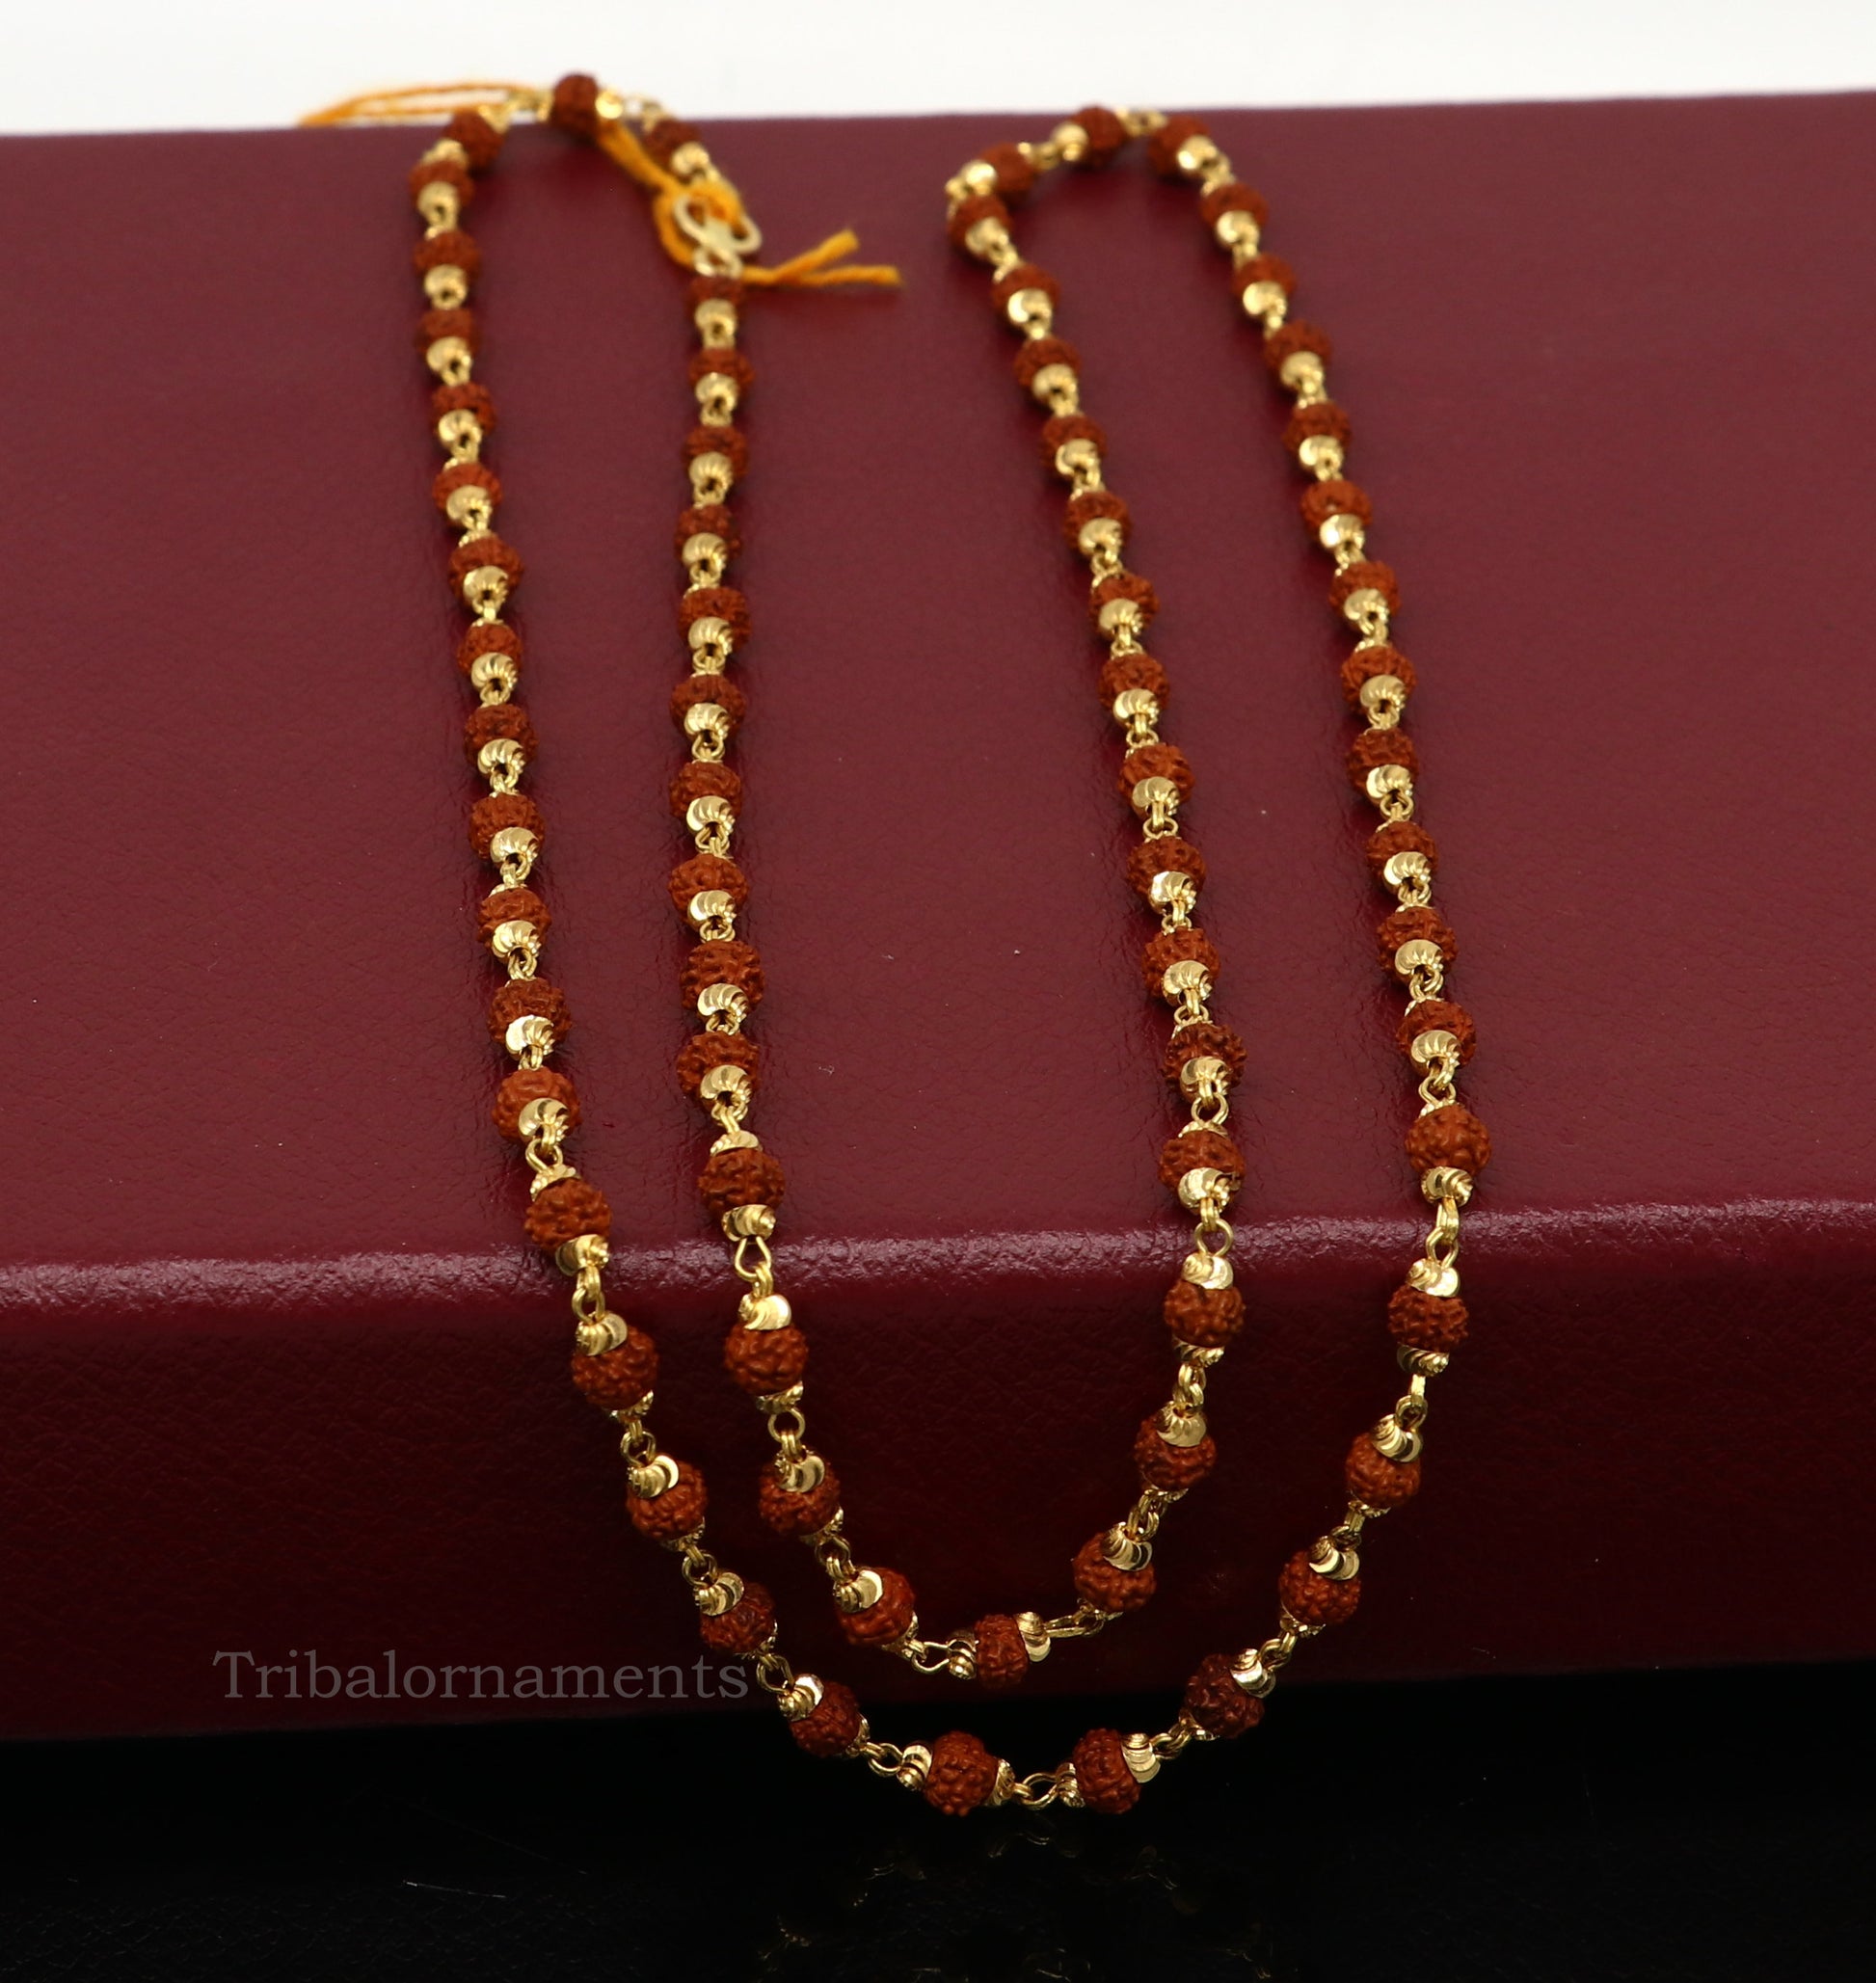 22kt yellow gold hallmarked 4 mm rudraksha chain necklace, Gorgeous design customized beaded chain, excellent wedding gifting jewelry ch265 - TRIBAL ORNAMENTS